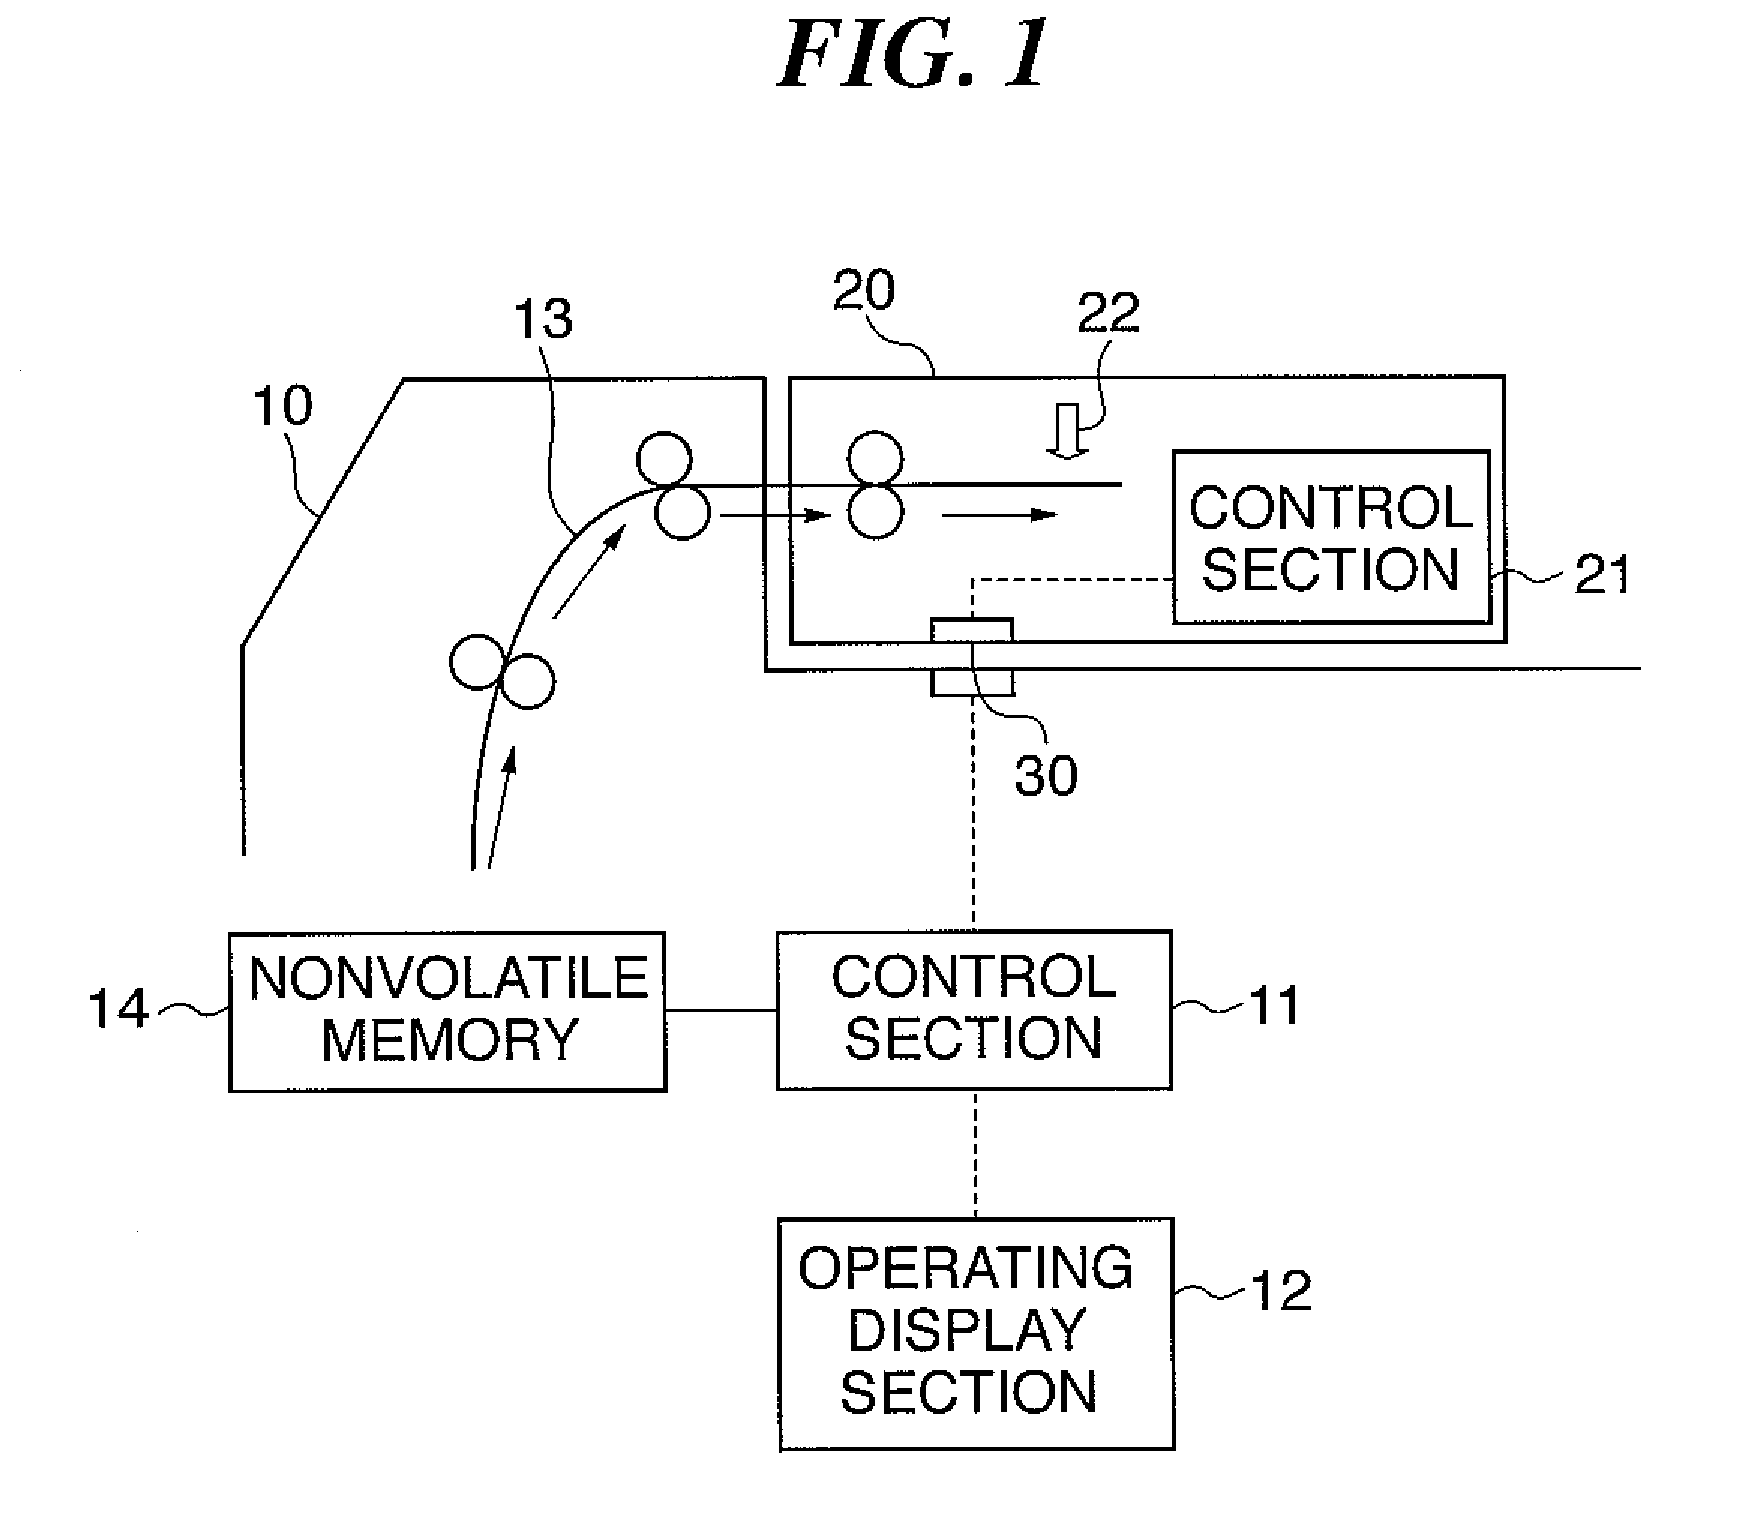 Image forming apparatus and method of determining state of sheet handling apparatus disconnectably connected thereto